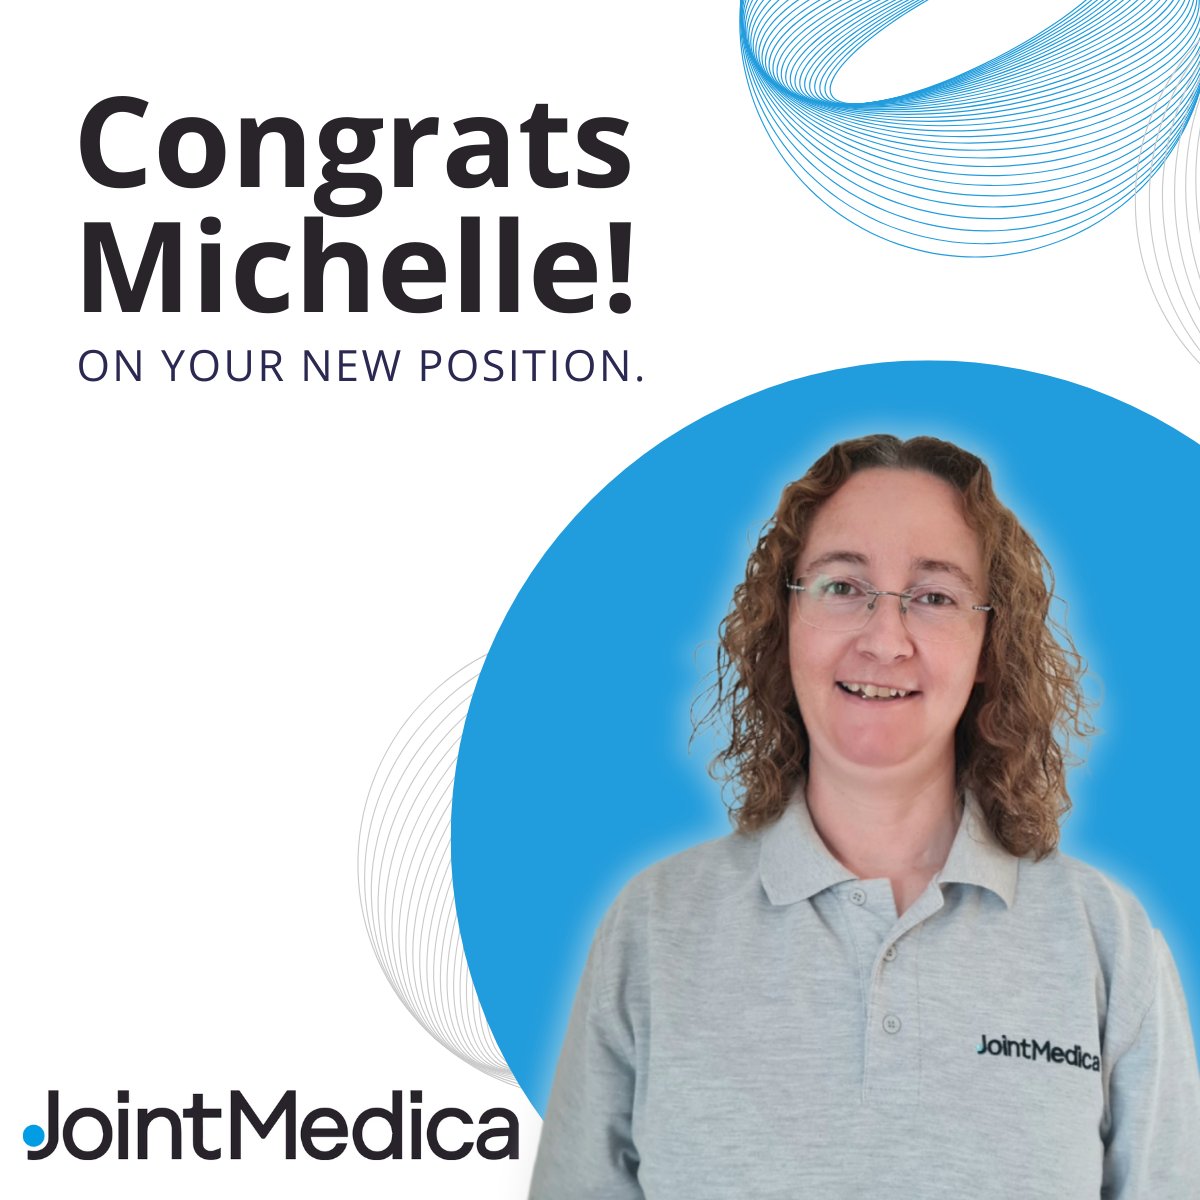 We're thrilled to announce the promotion of Michelle Evans to the role of Manufacturing Technician – Team Leader. Michelle's dedication and hard work in our manufacturing department have truly shone through, making her the perfect fit for this new position. Her commitment to